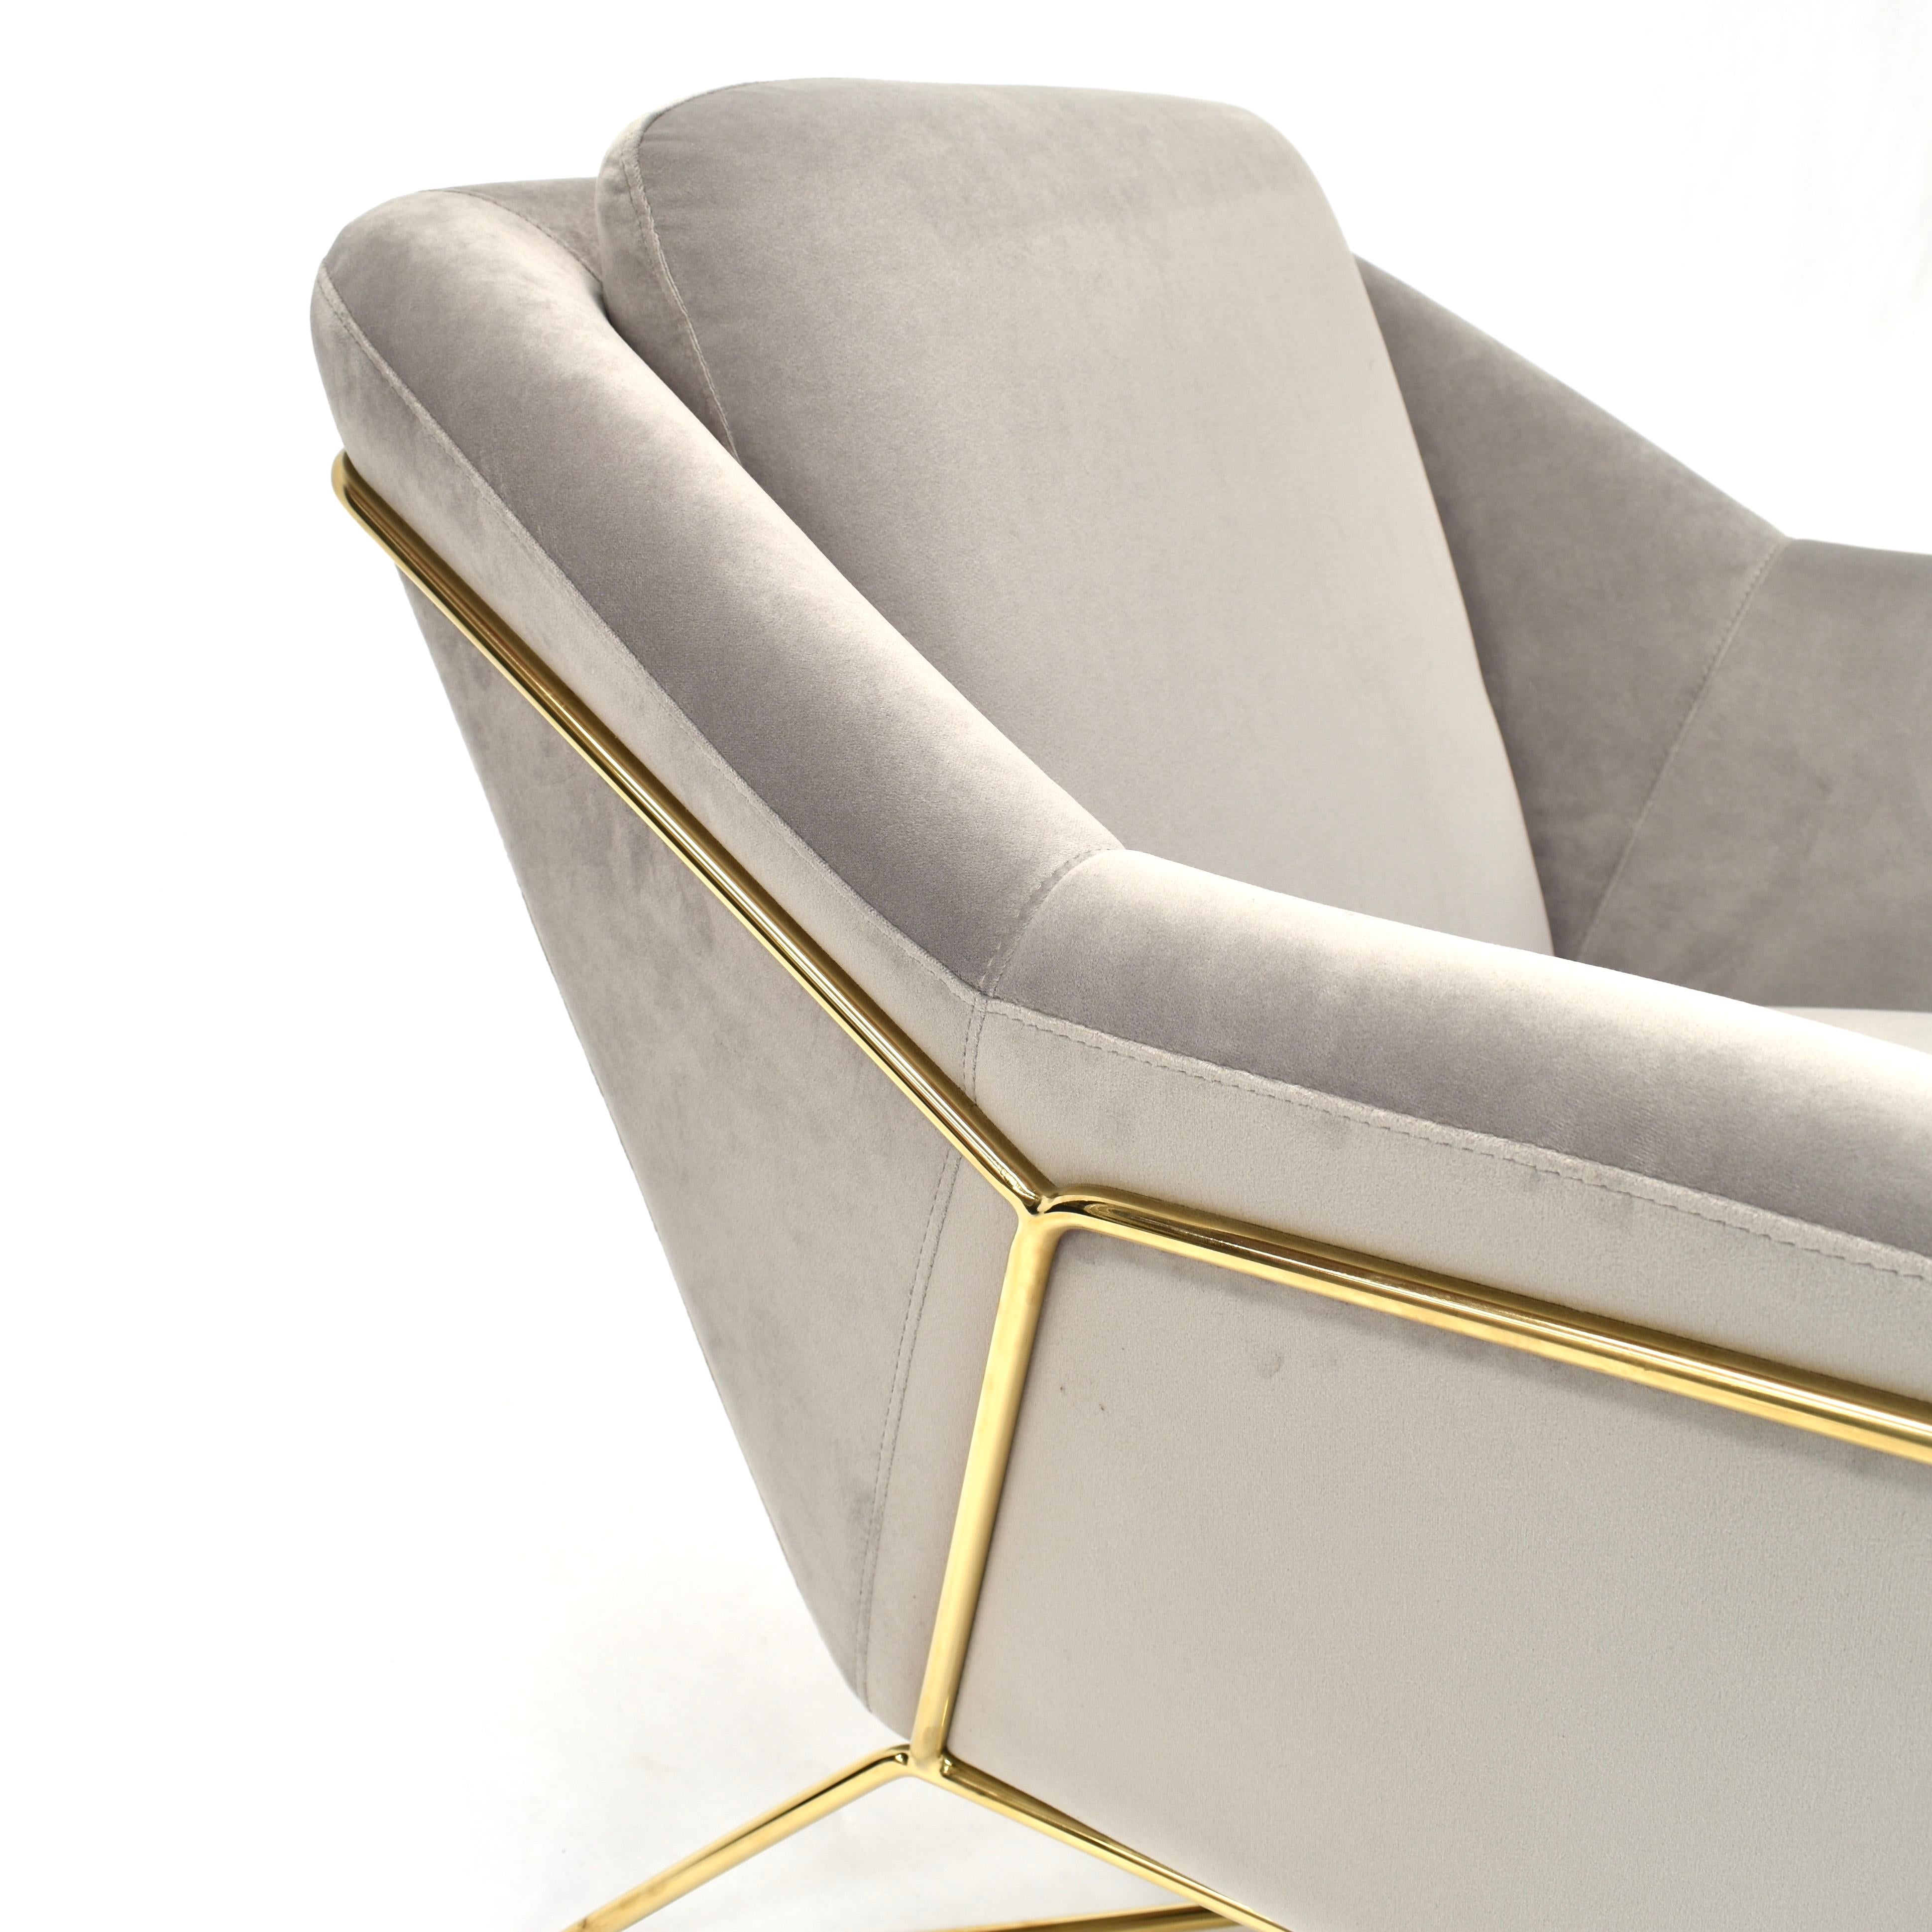 Elegant SOHO Lounge Chair in Velvet and Gold, 21st Century In New Condition For Sale In Pijnacker, Zuid-Holland